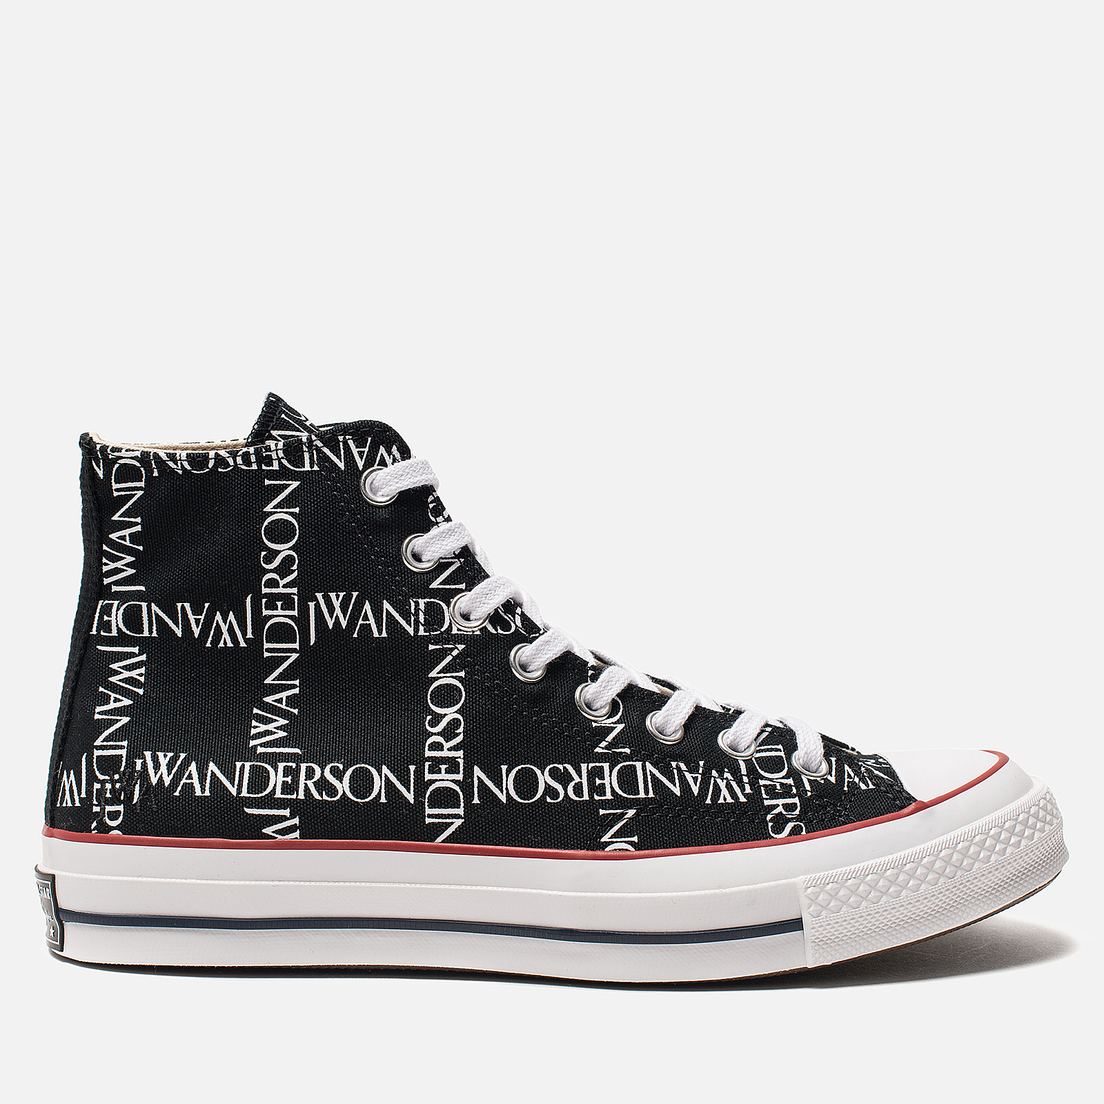 buy \u003e w anderson converse, Up to 71% OFF